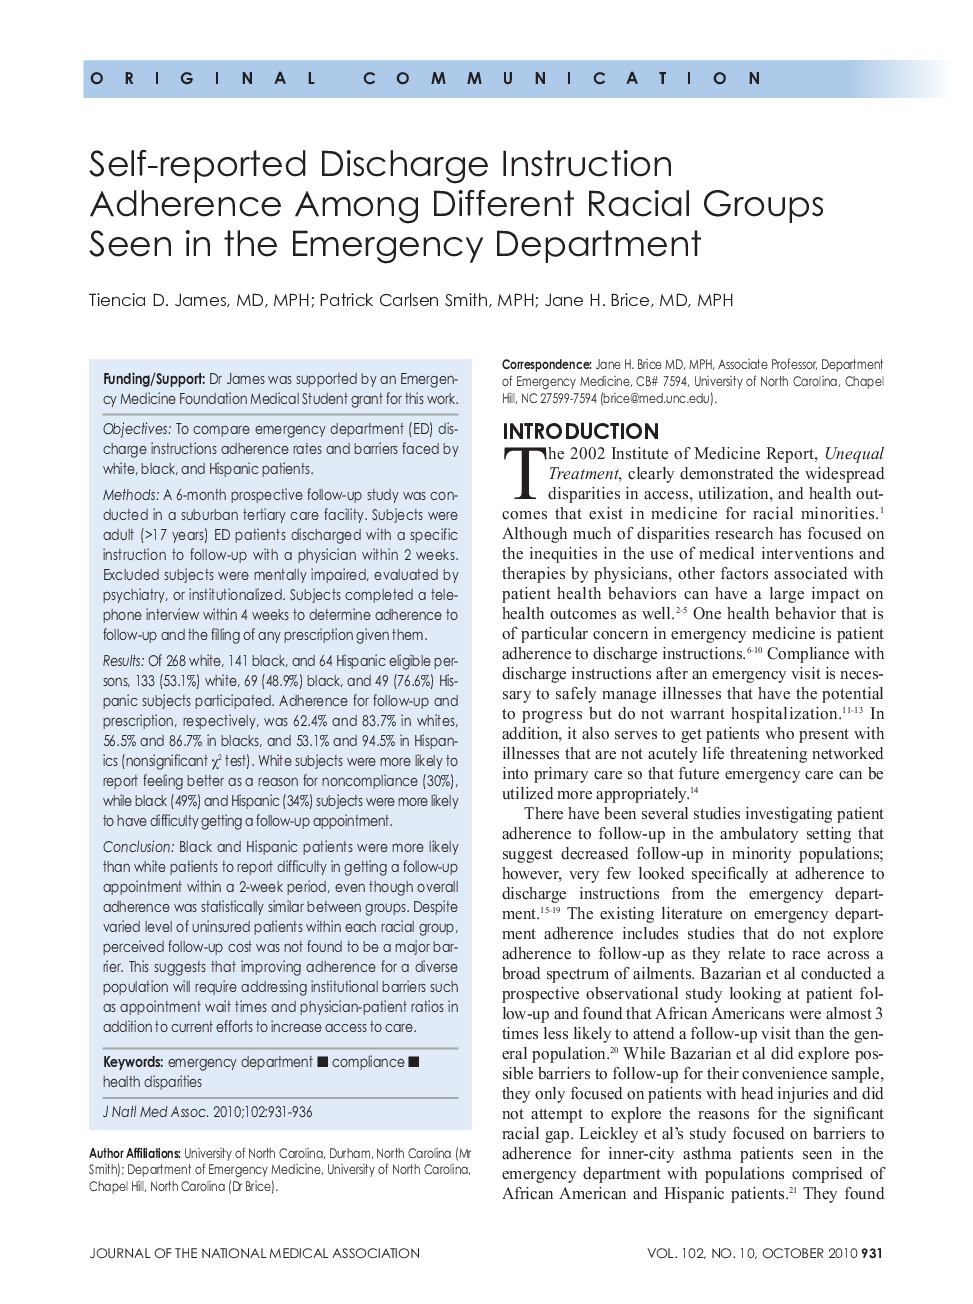 Self-reported Discharge Instruction Adherence Among Different Racial Groups Seen in the Emergency Department